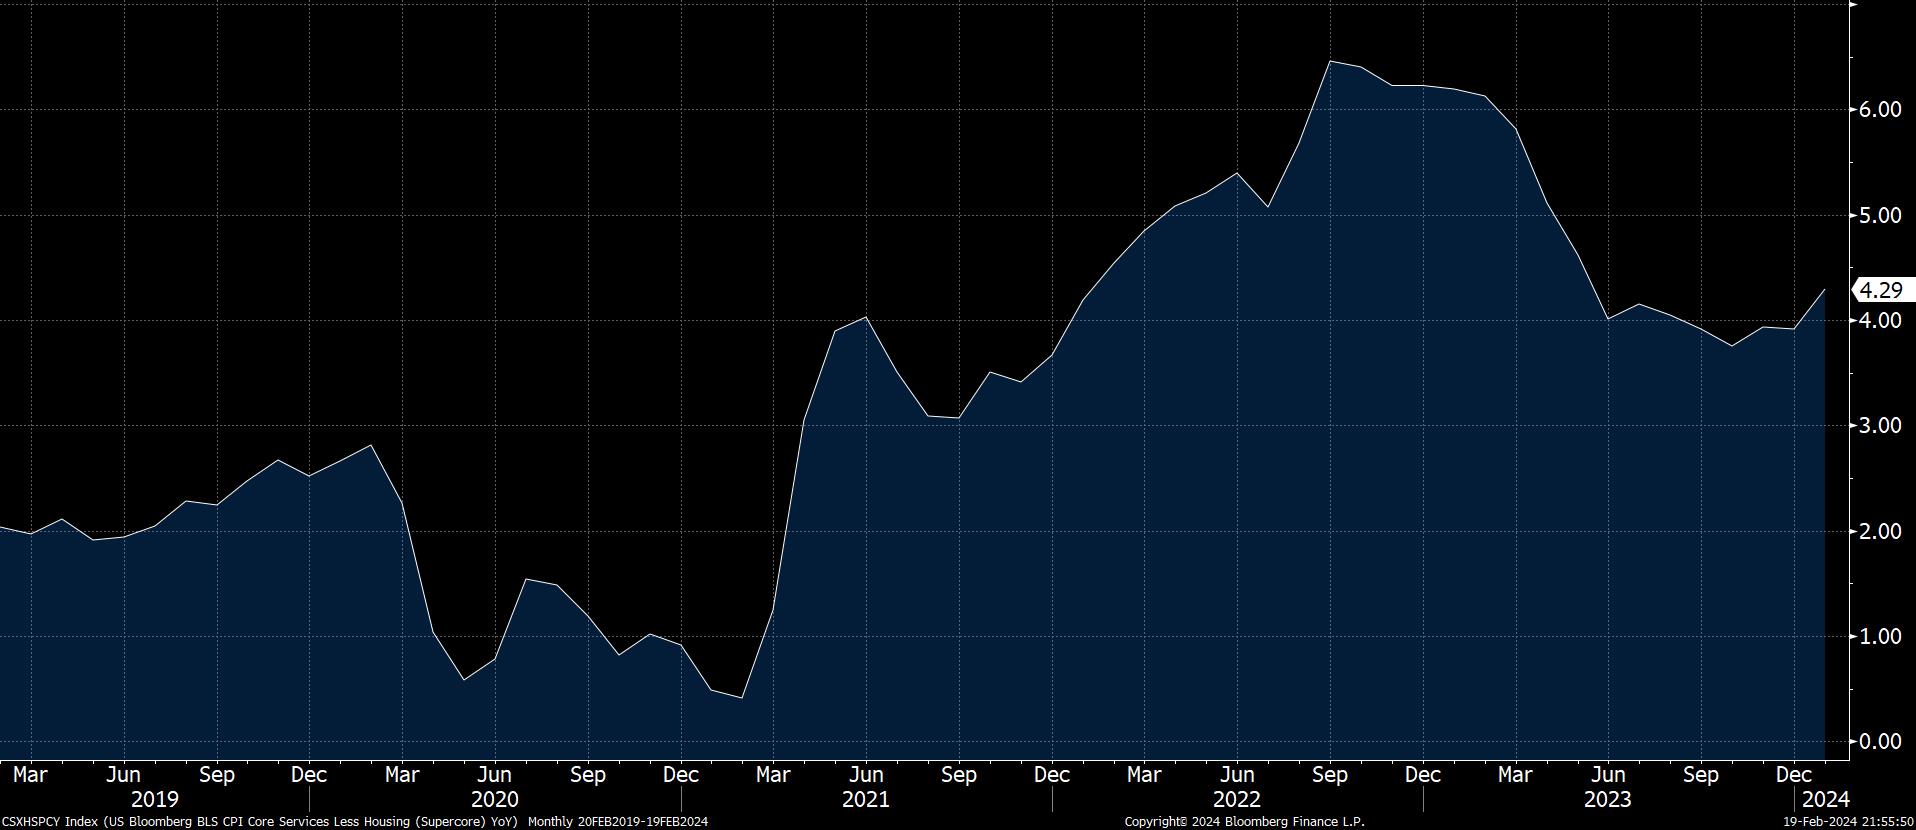 Source: Bloomberg; U.S. Bloomberg BLS CPI Core Services Less Housing Index (Supercore) as of 2/19/24